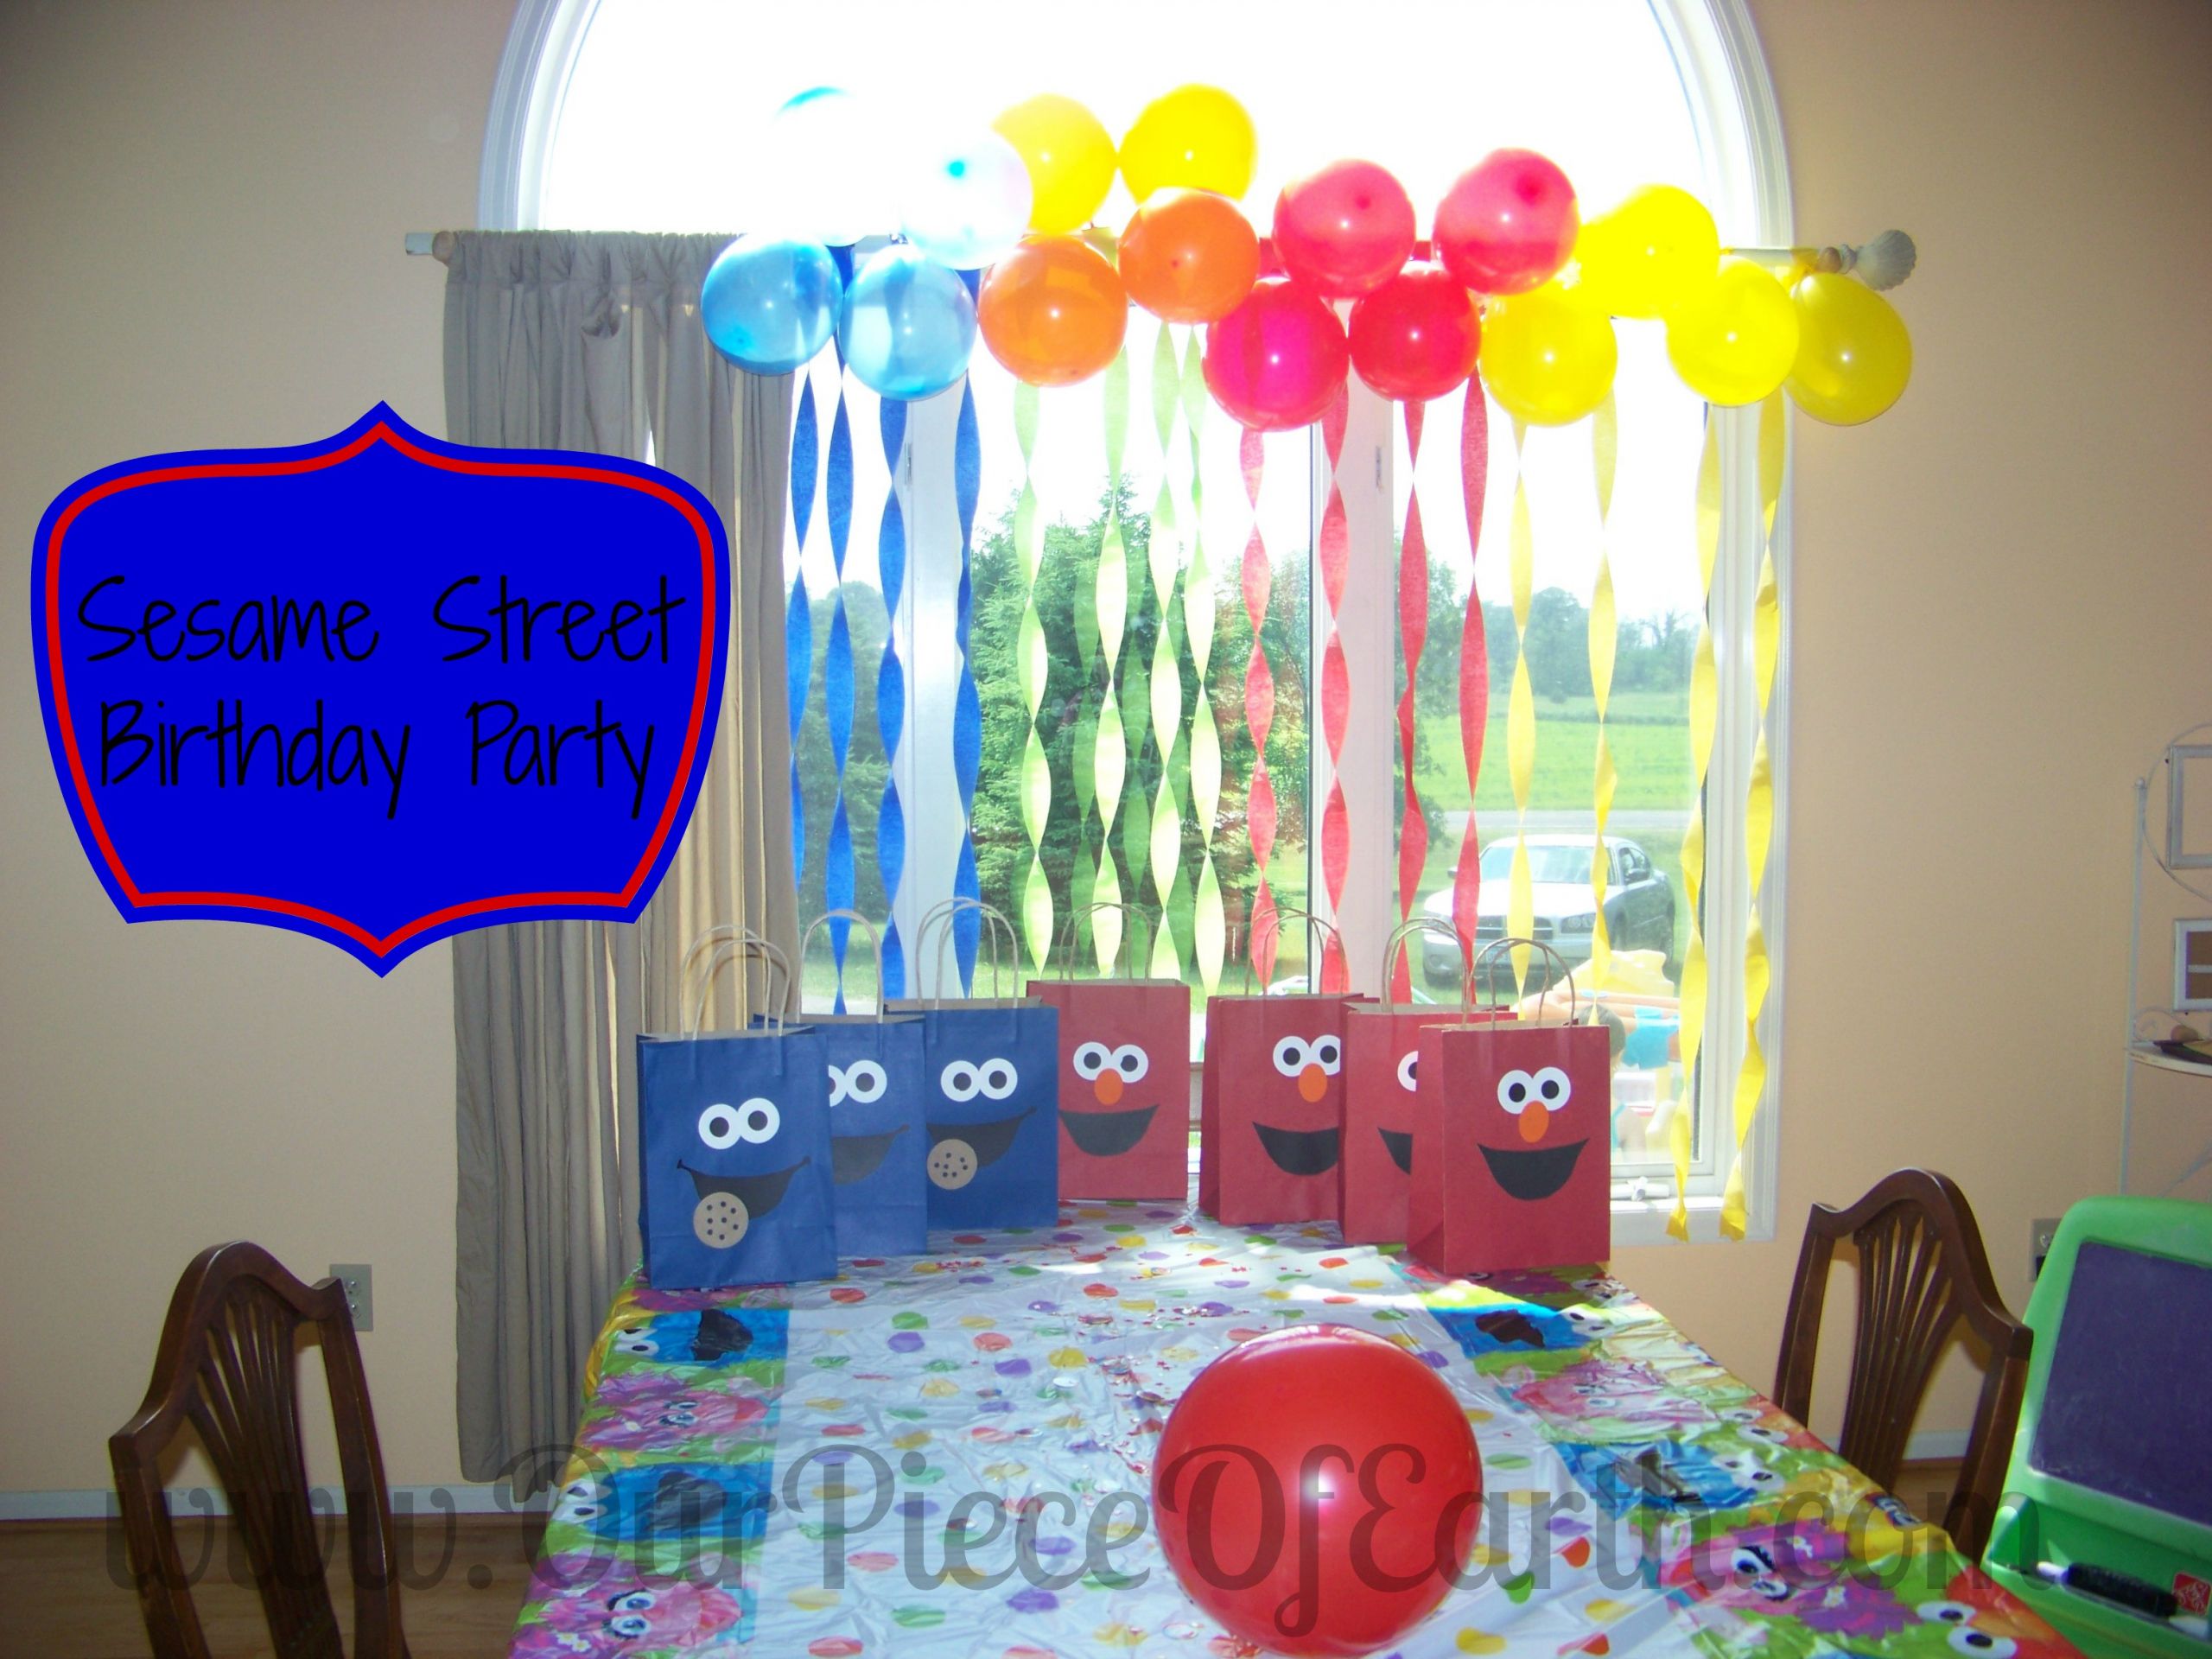 Sesame Street Birthday Party Decorations
 A Sesame Street Birthday Party for Charlie Our Piece of